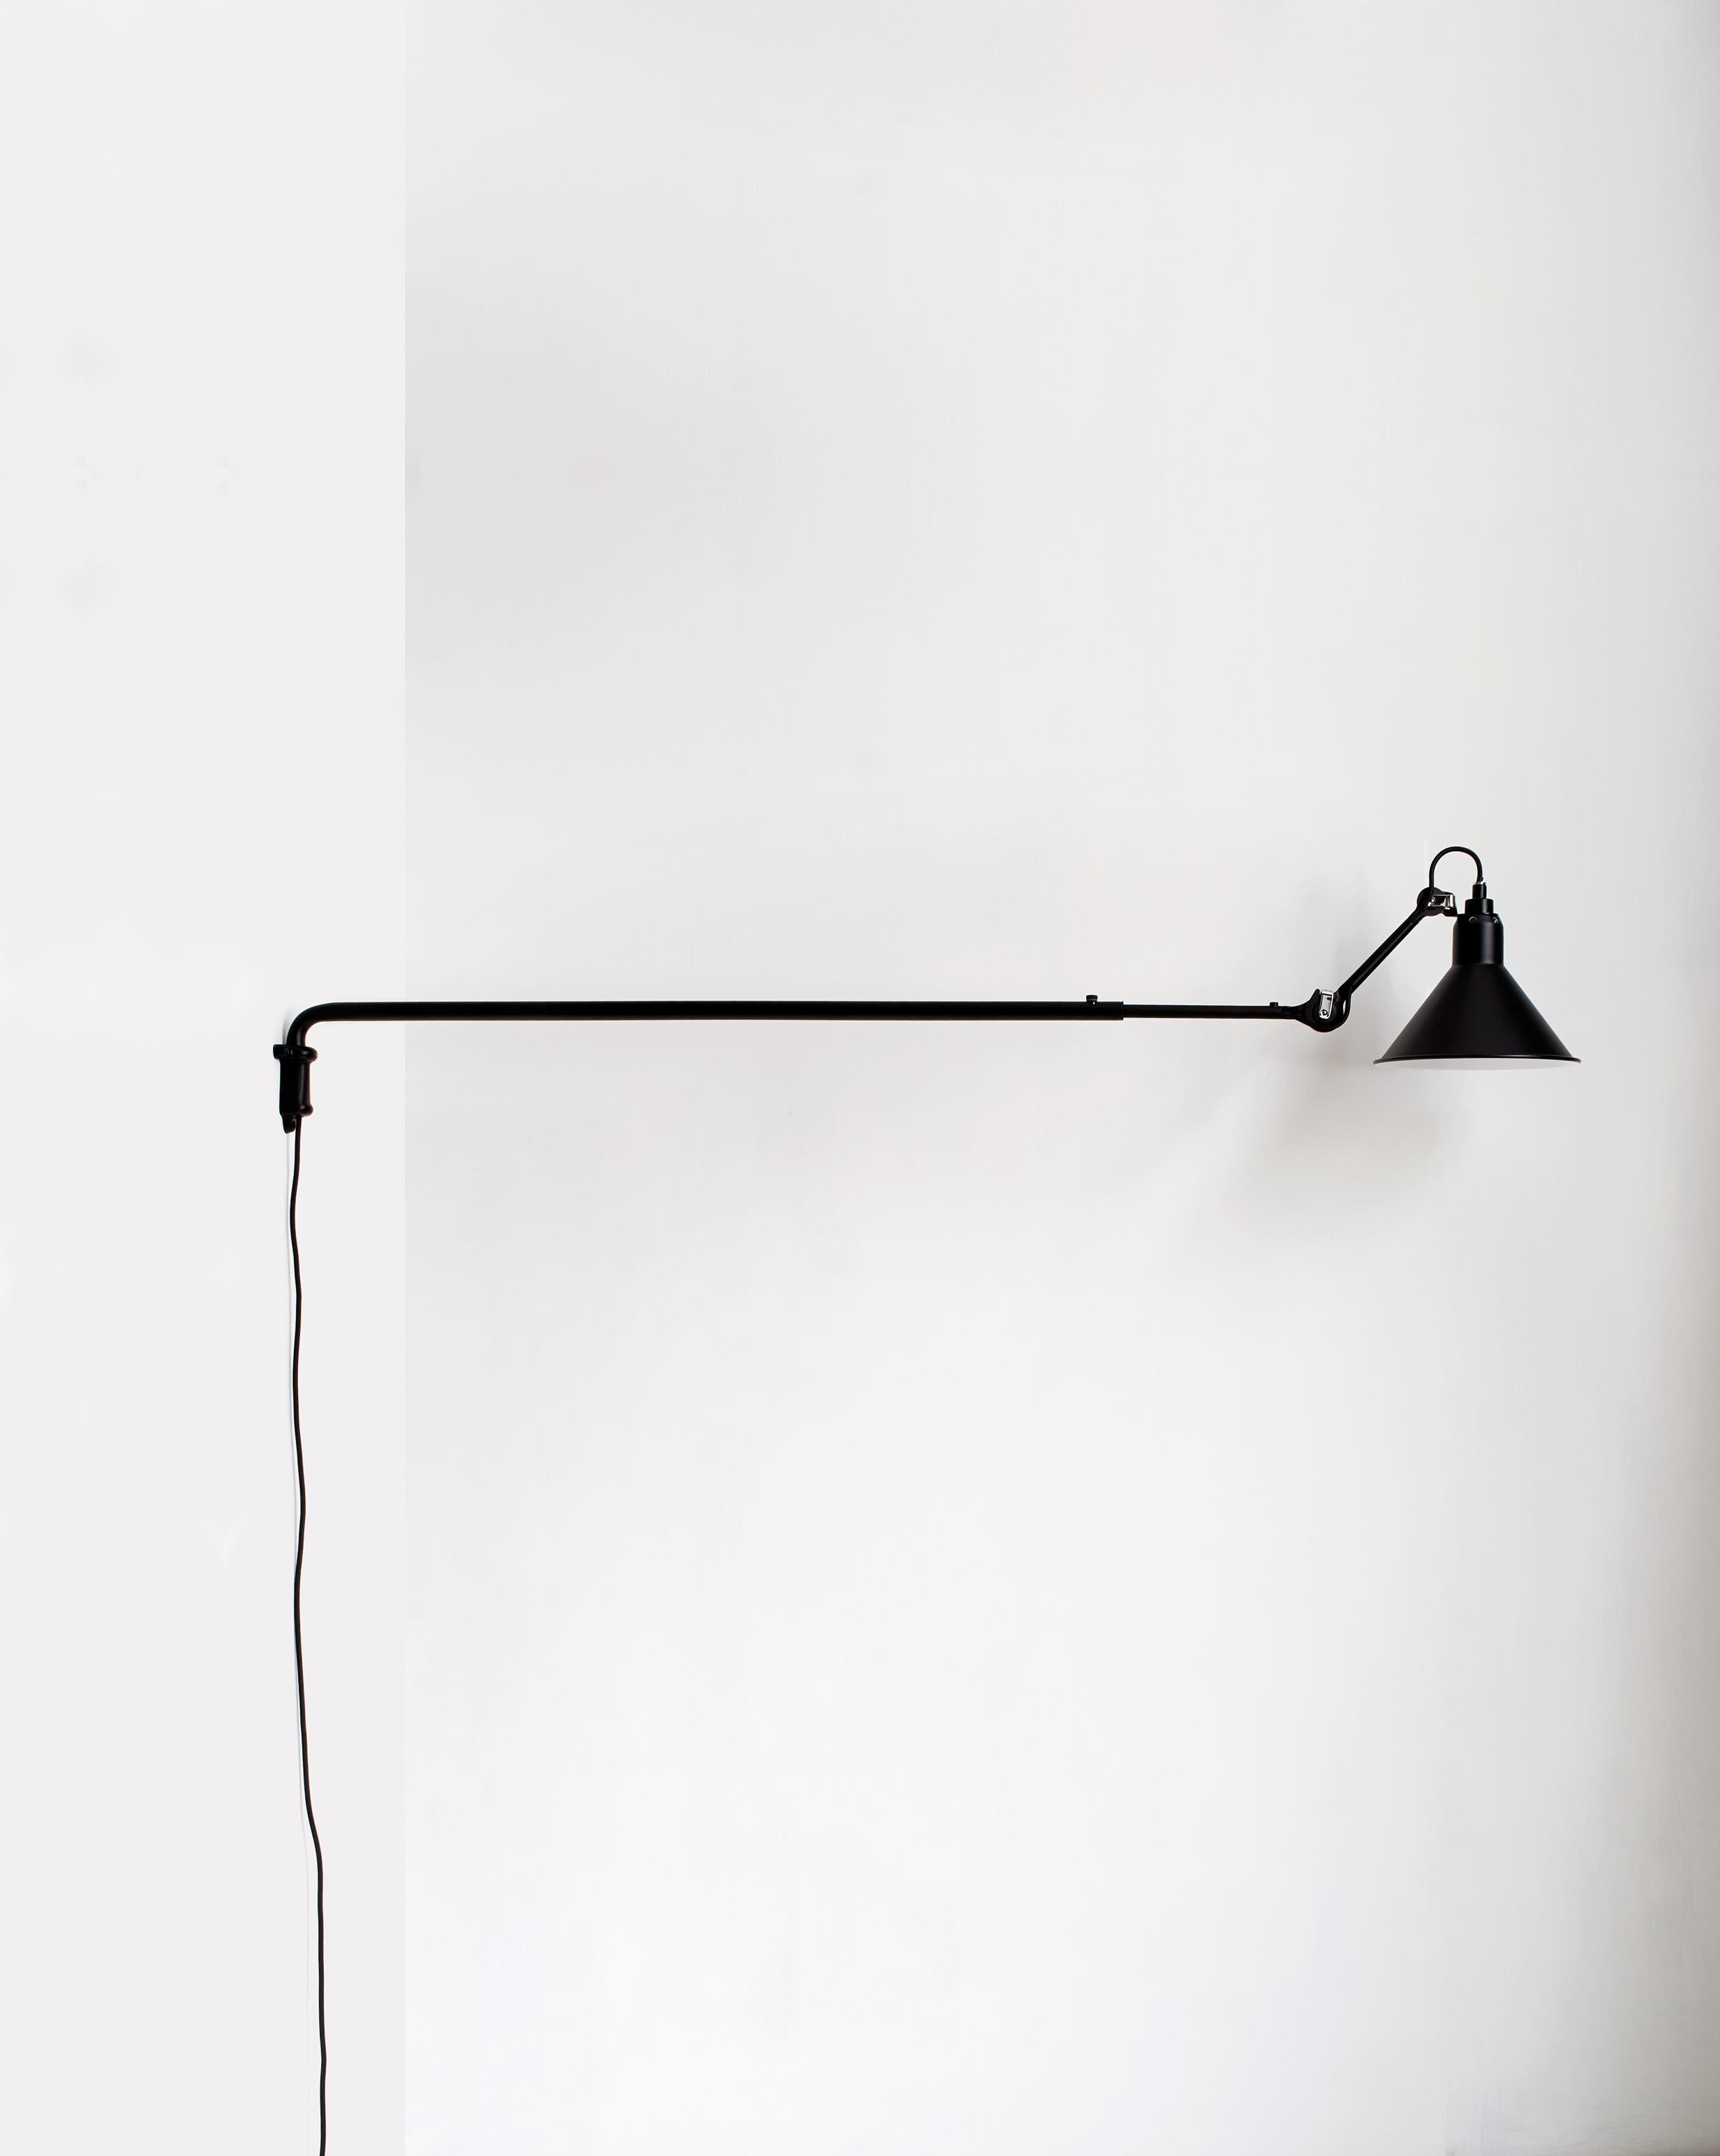 DCW Editions La Lampe Gras N°213 Wall Lamp in Black Arm and Black Shade by Bernard-Albin Gras
 
 In 1921 Bernard-Albin GRAS designed a series of lamps for use in offices and in industrial environments. The GRAS lamp, as it was subsequently called,